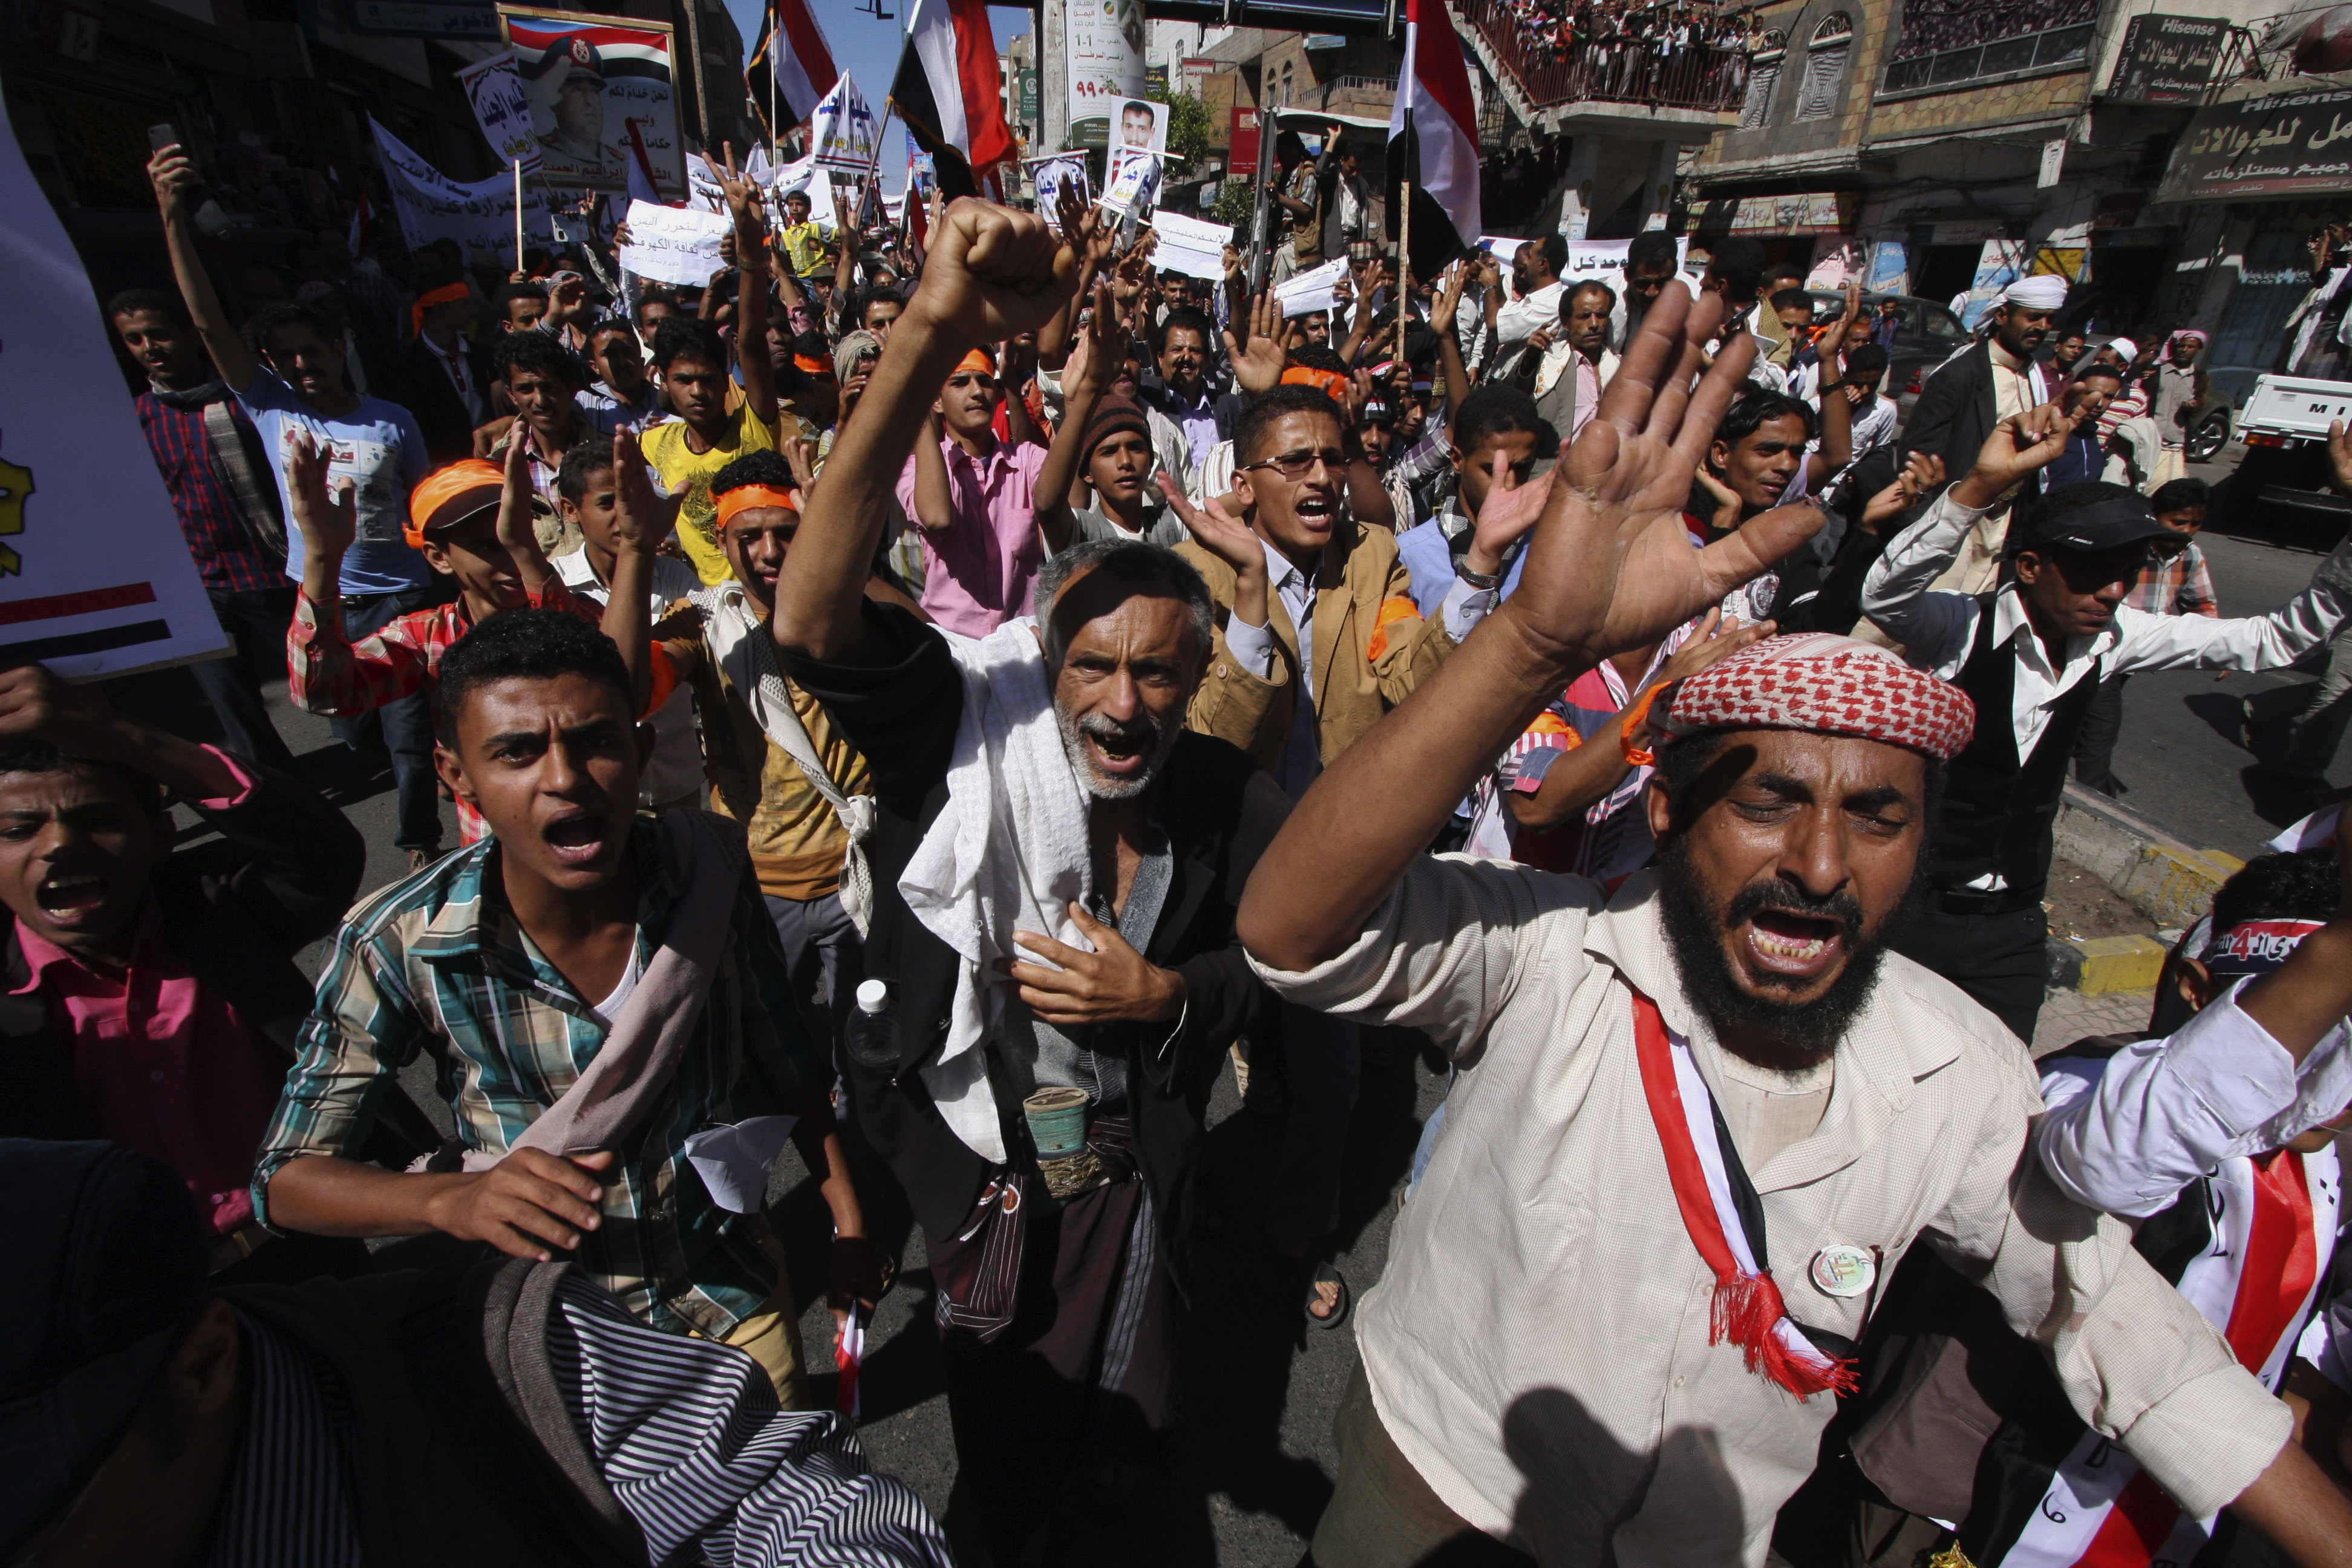 Protesters in Taiz, Yemen,  on Feb. 11, 2015, shout slogans against Houthi Shi‘ite who have seized power in the country's capital, Sana‘a (Anees Mahyoub—AP)